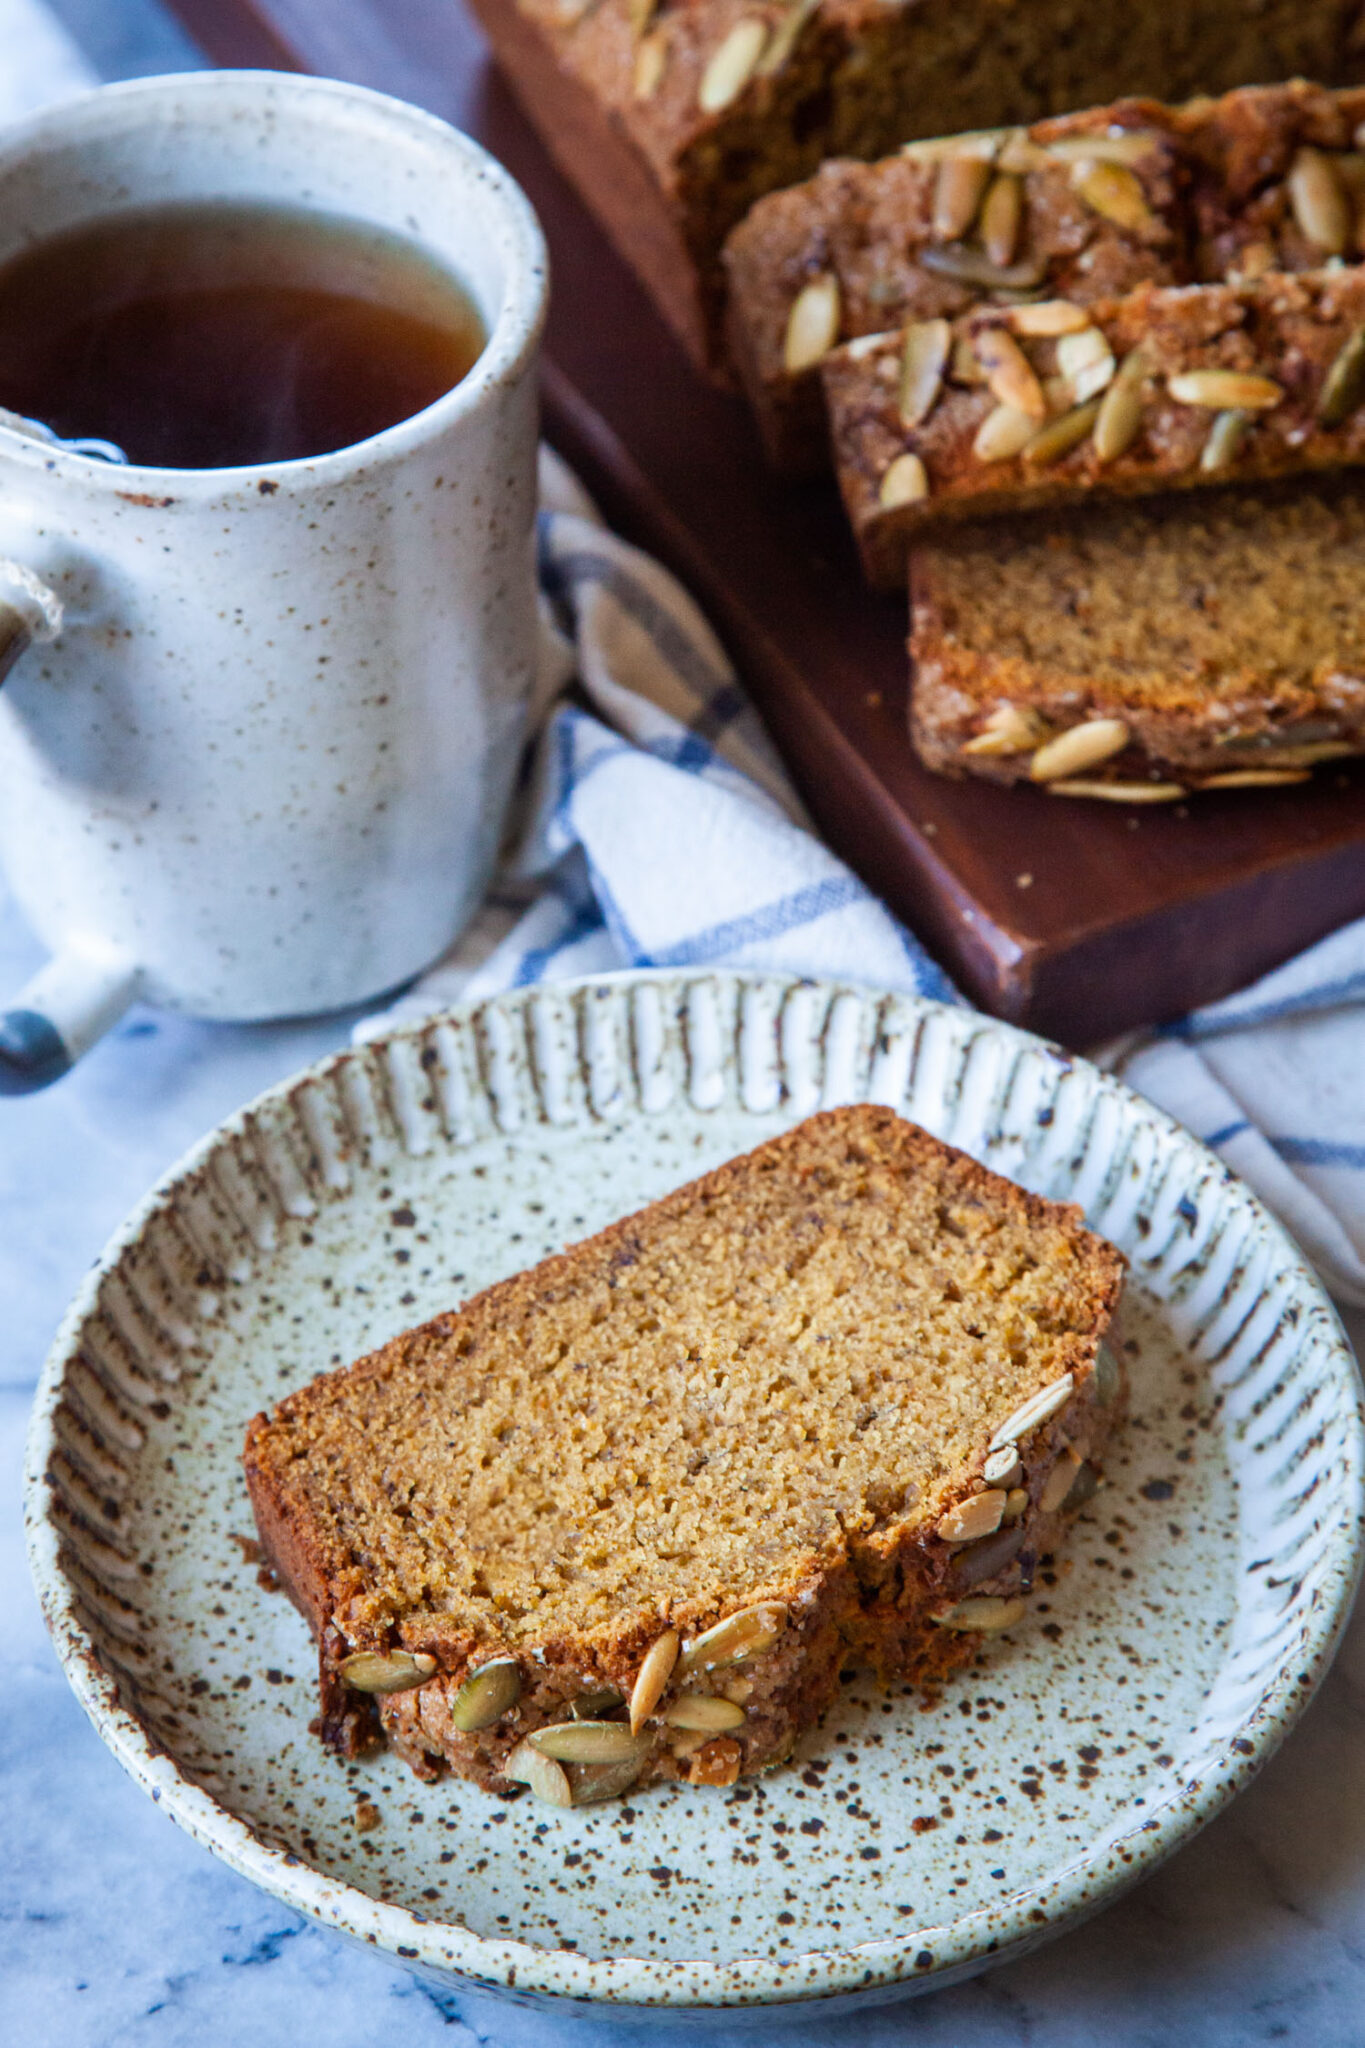 A slice of pumpkin banana bread on a ceramic plate, with a mug of tea and the remaining pumpkin banana bread sliced on a cutting board behind the plate.